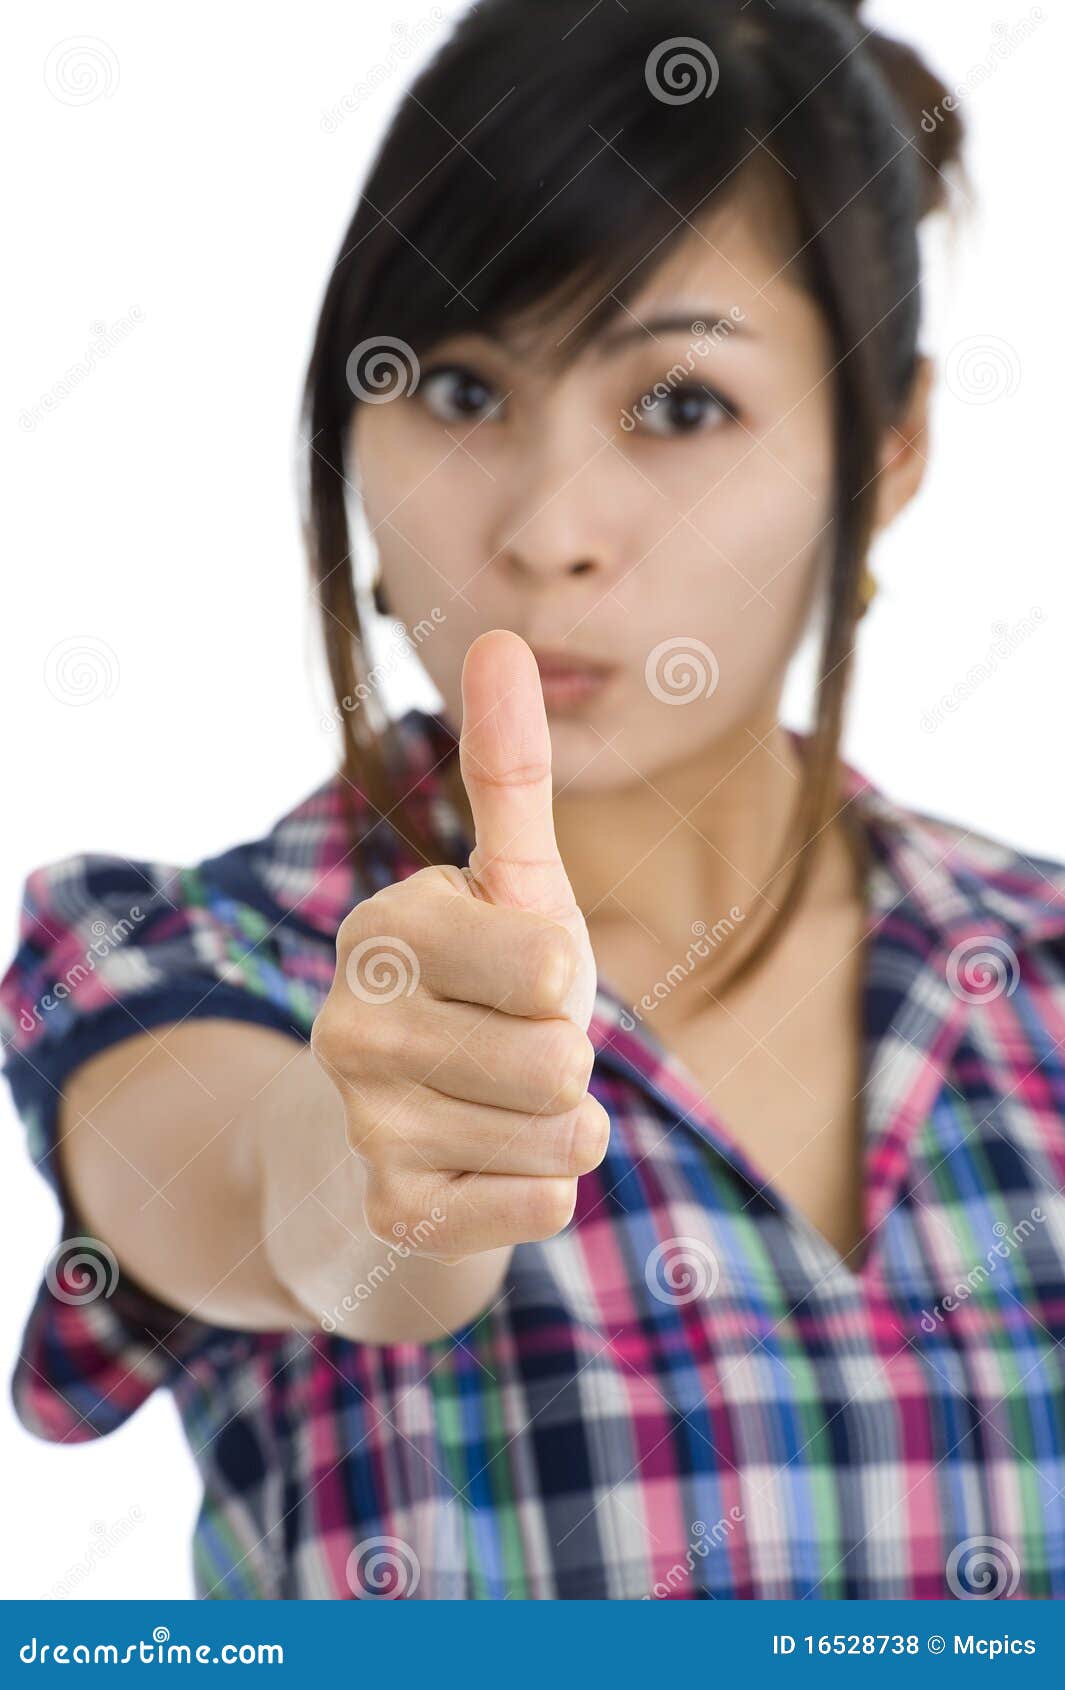 Woman with one thumb up. Beautiful woman shows one thumb up. focus on the thumbs with a shallow depth of field. isolated on white background.